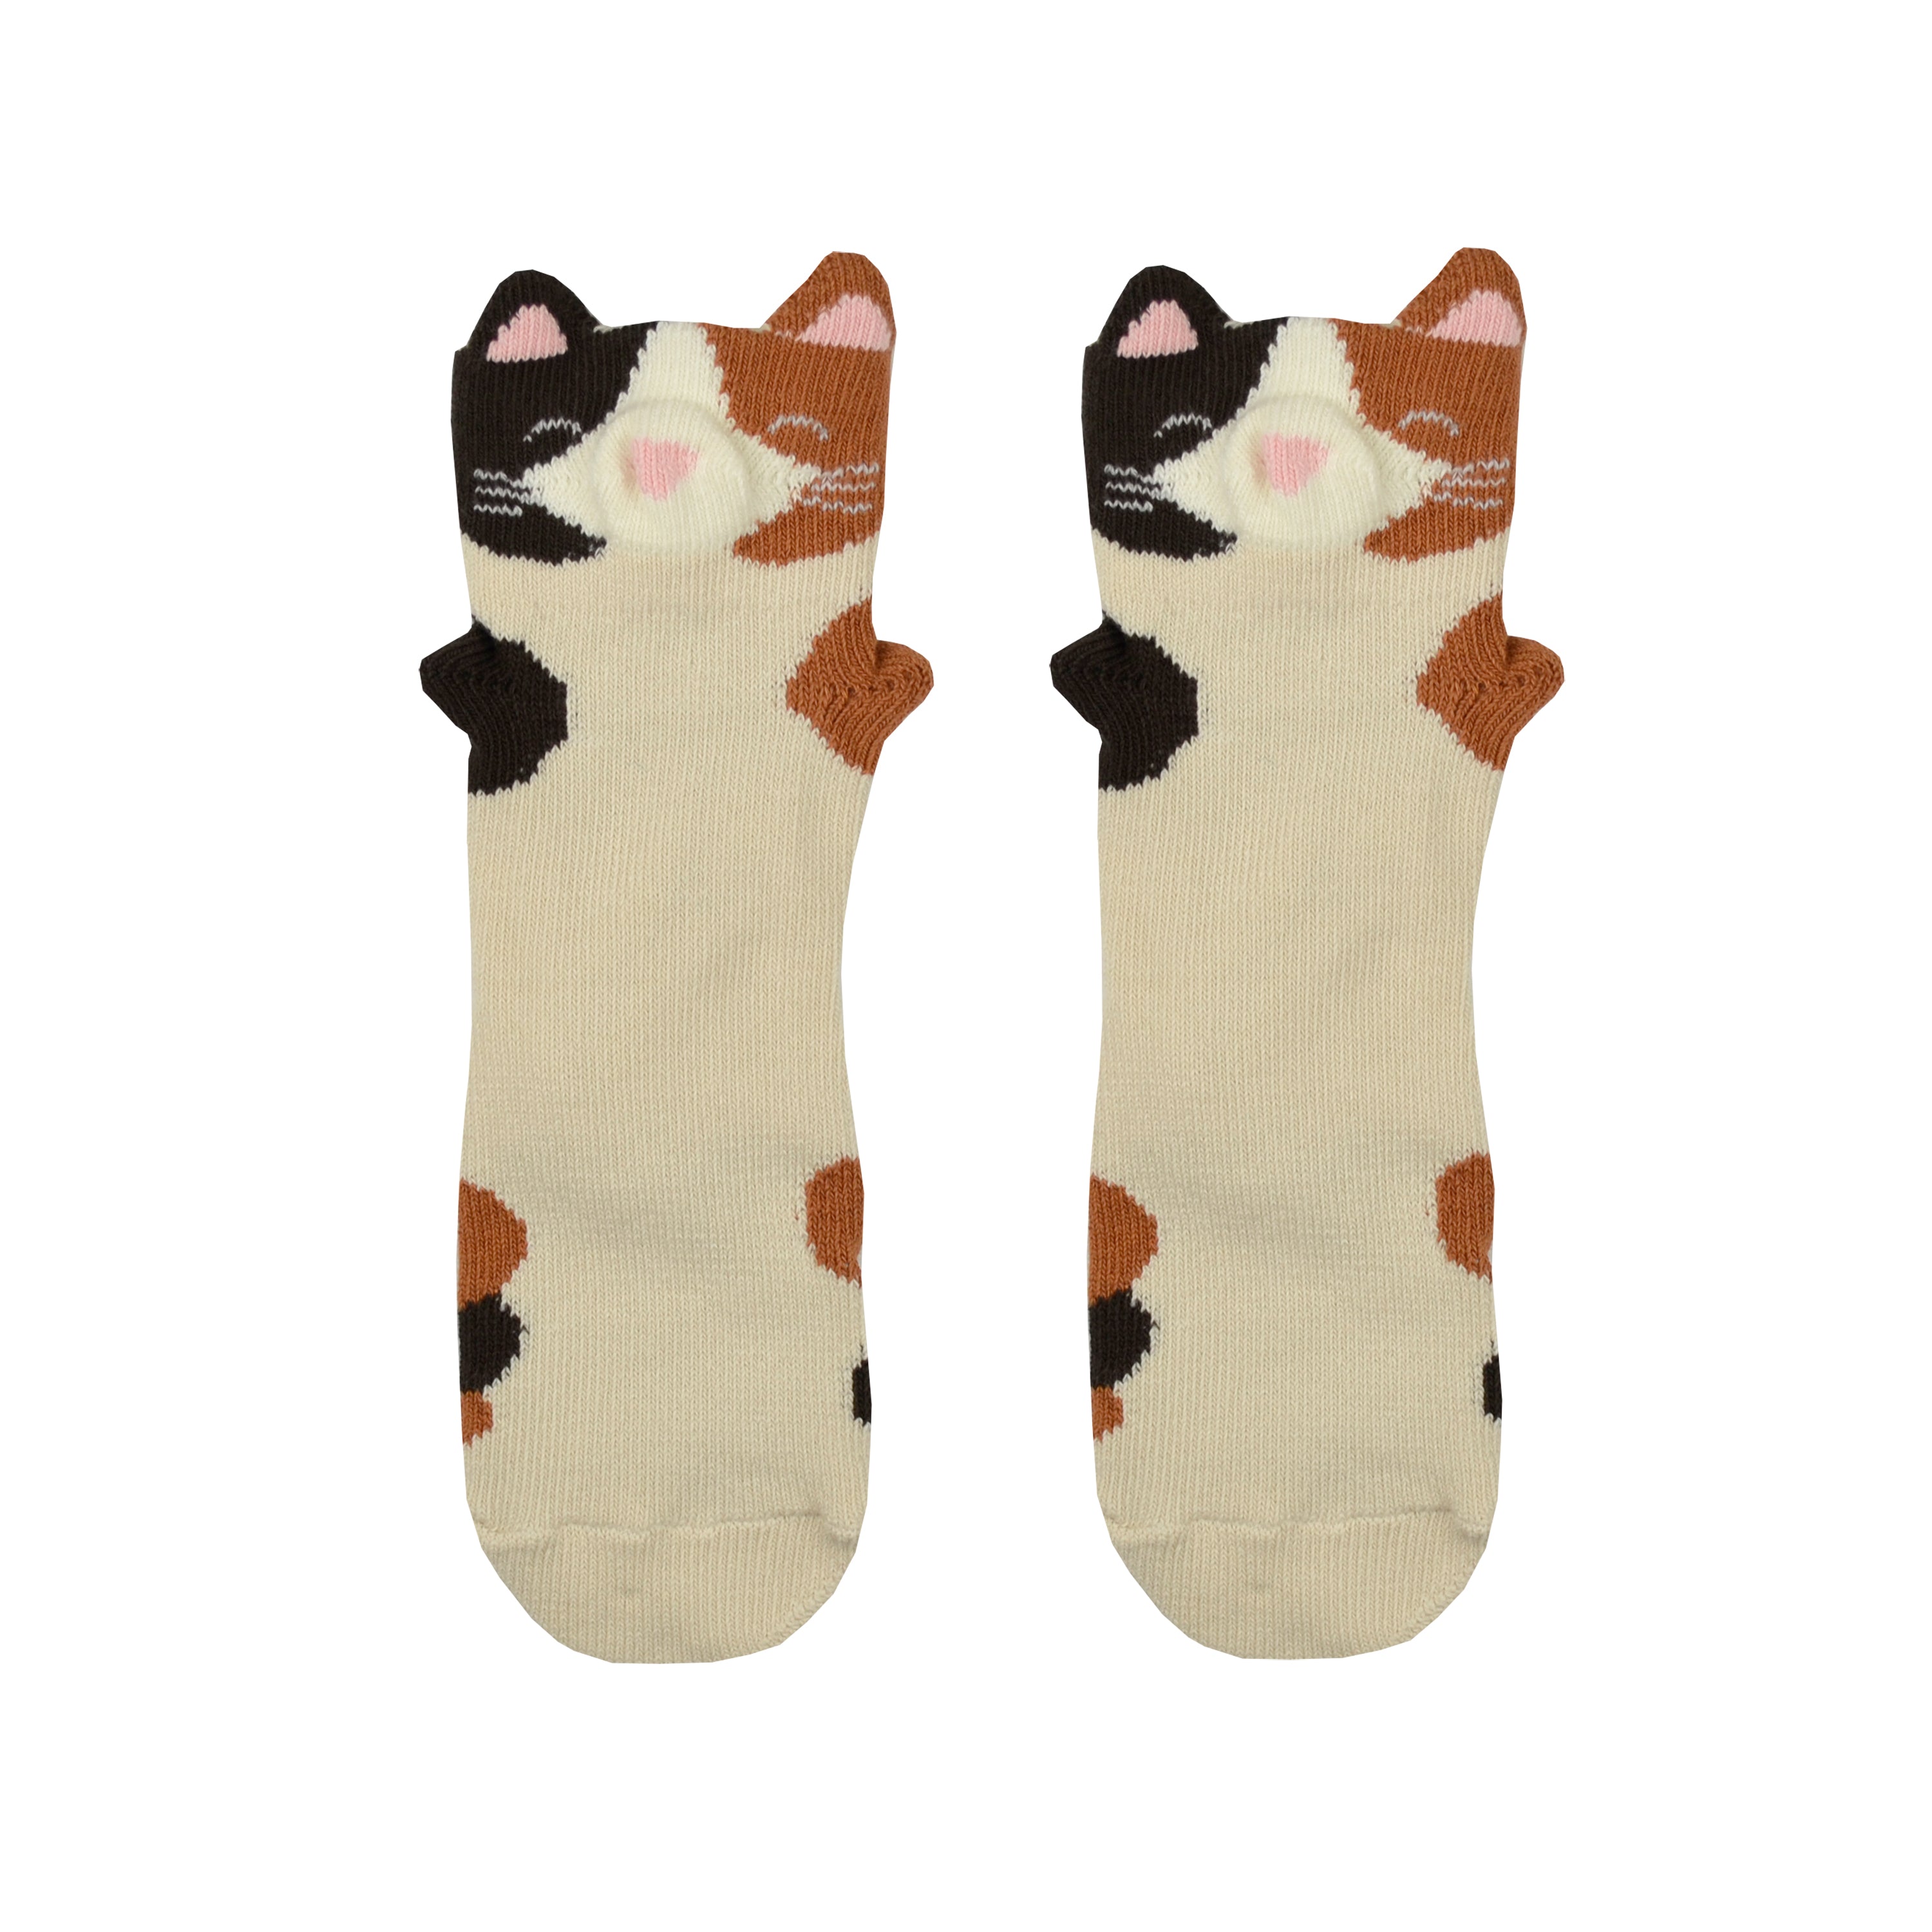 Shown in a flatlay, a pair of Foot Traffic brand kids cotton crew sock in off white with light and dark brown spots like a calico cat! The top of the sock features a cute cat face and 2 ears.